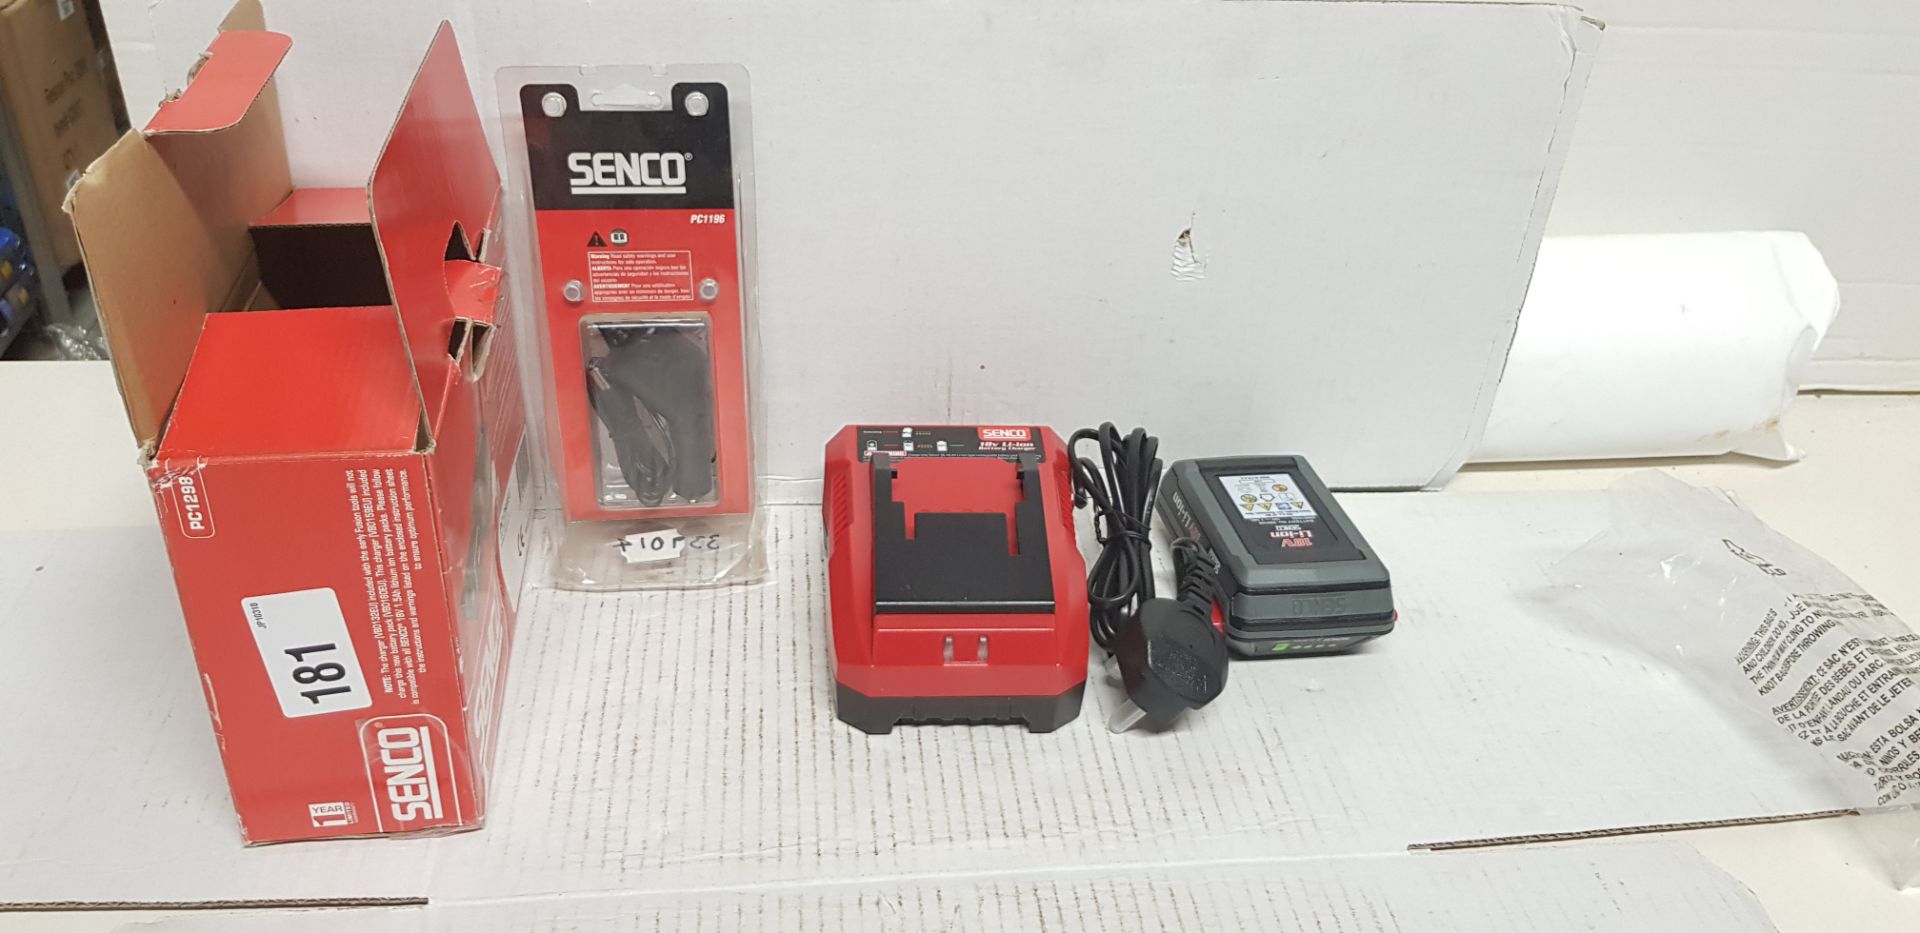 2 x Senco battery chargers, as listed | RRP £ 267.73